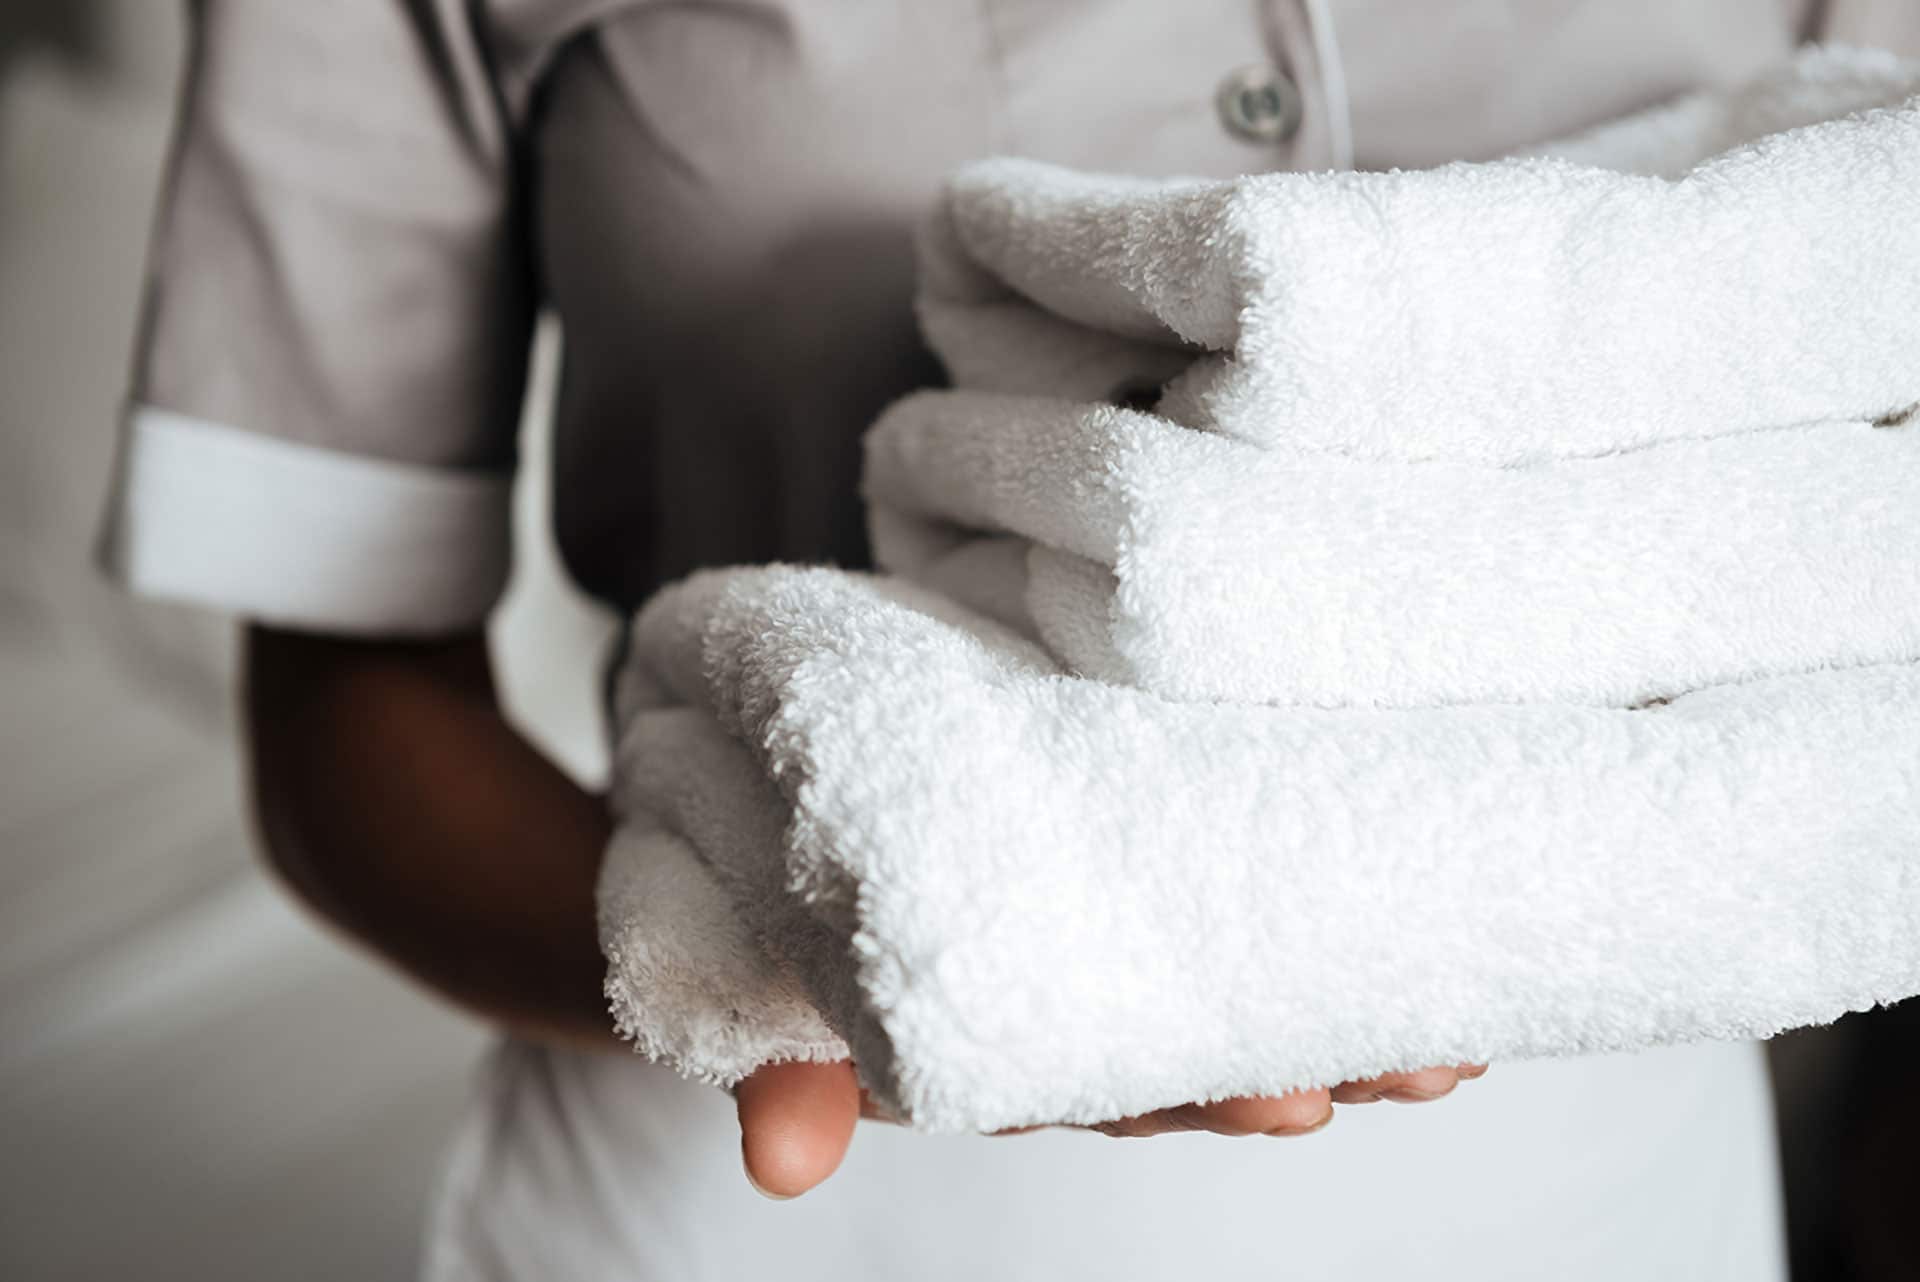 Fast friendly support for your hotel laundry system. We're the Hotel laundry and dishwashing repair specialists Just call us free on: 0800 652 5692.